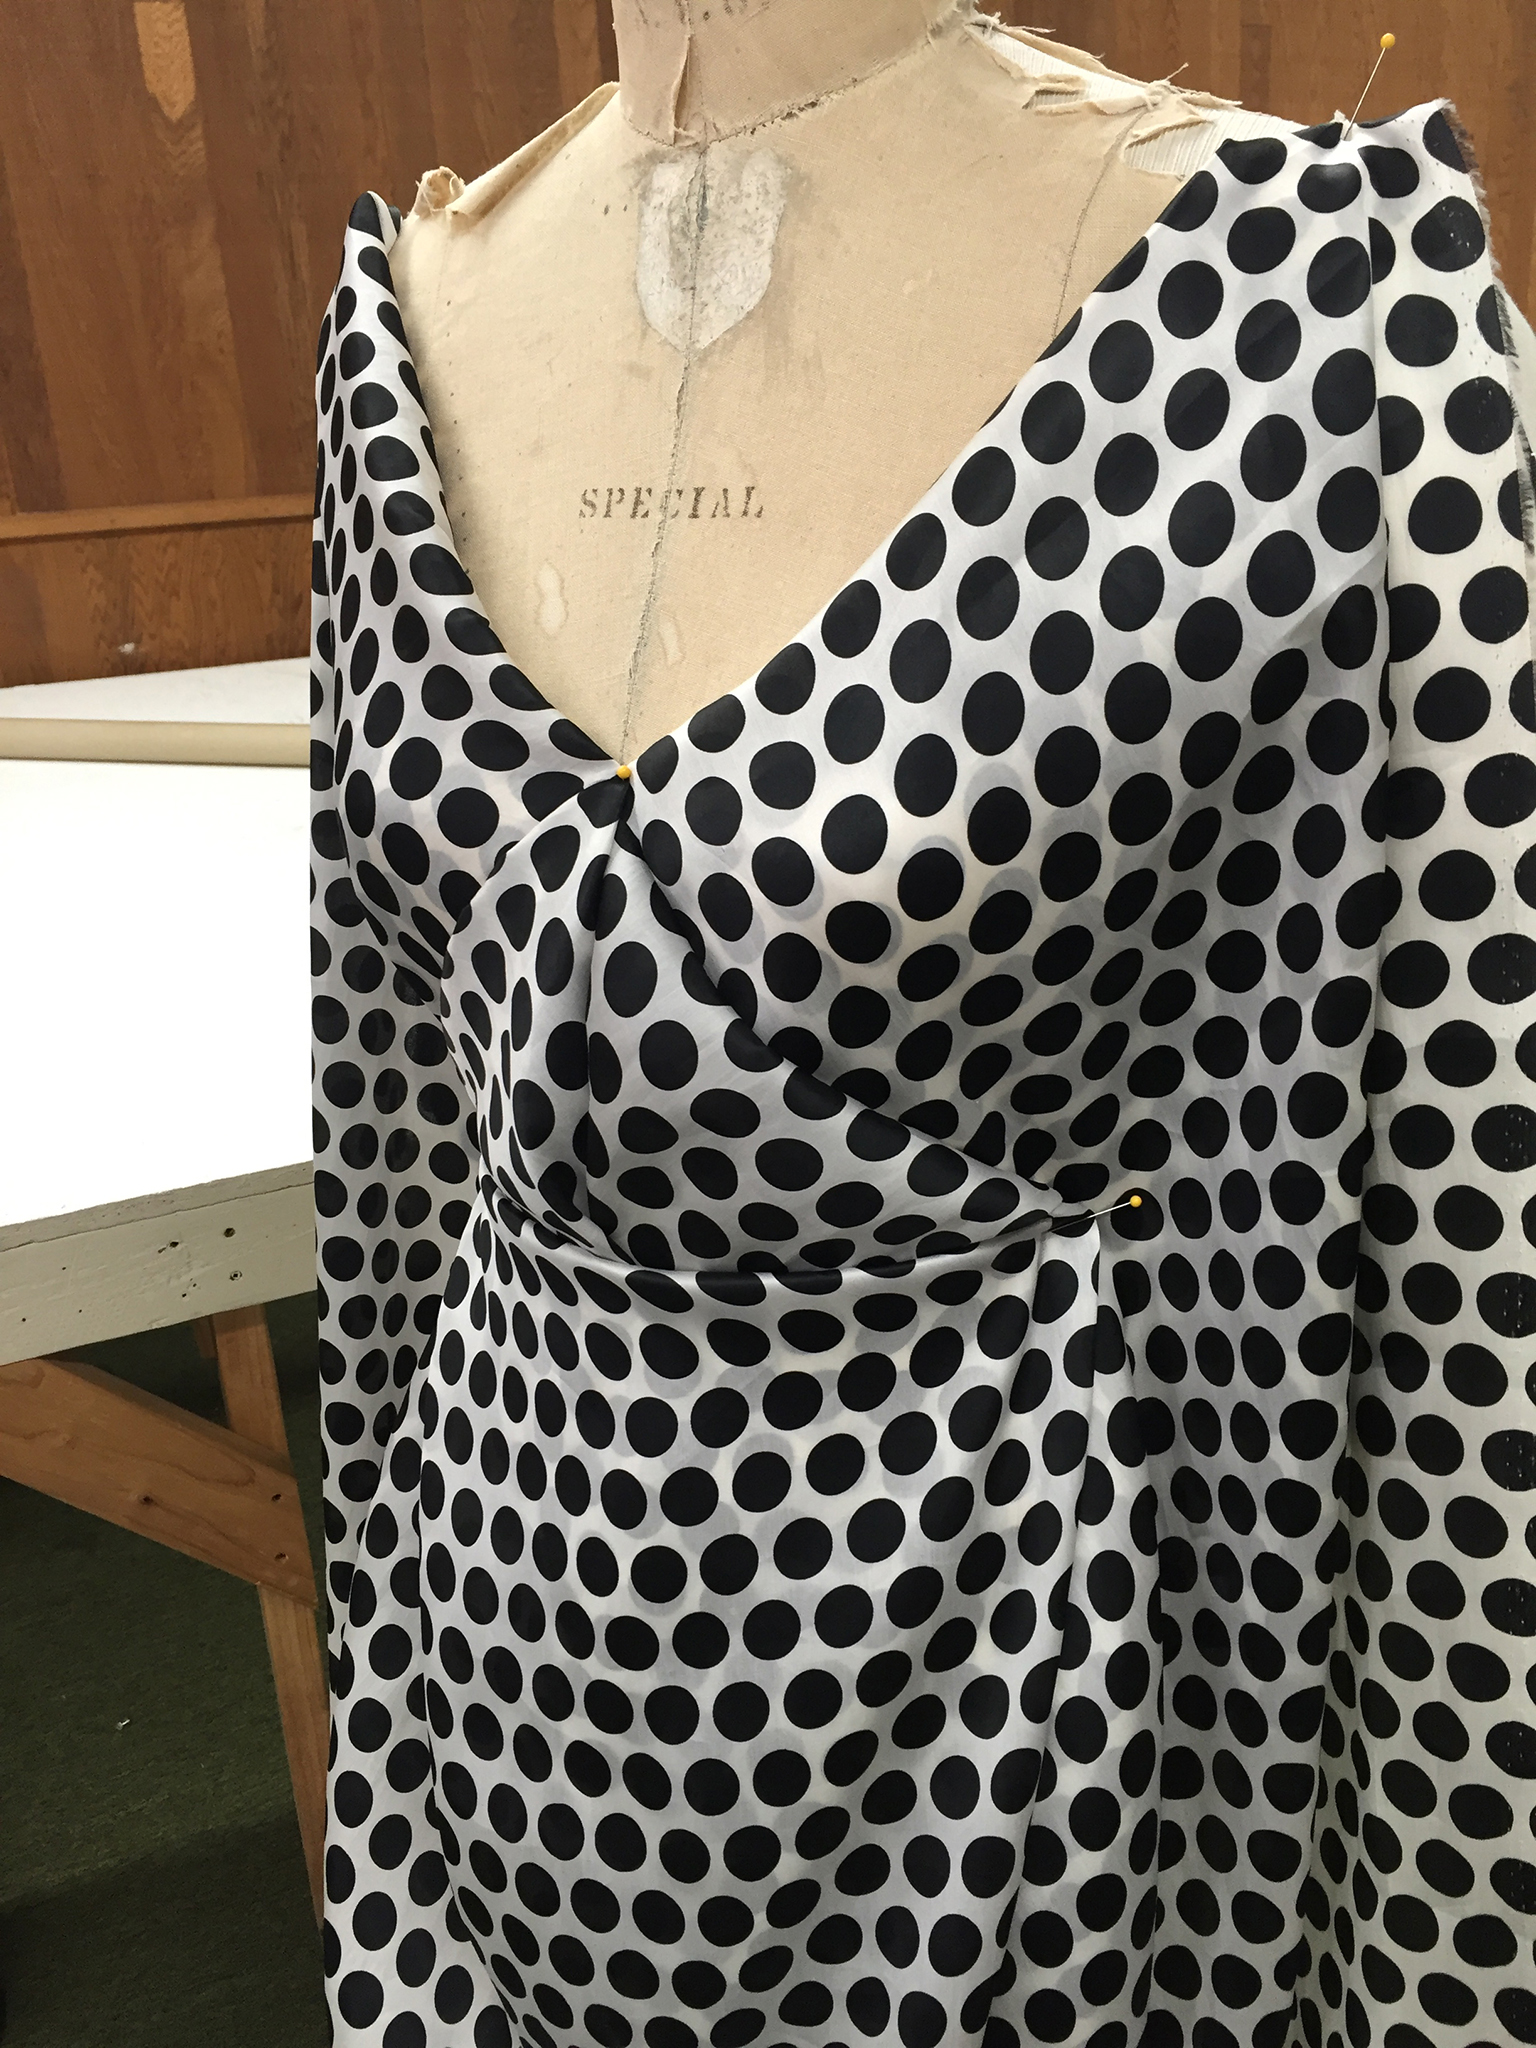 10 yards of continuous white silk organza fabric with black polka dots draped over a dress form.